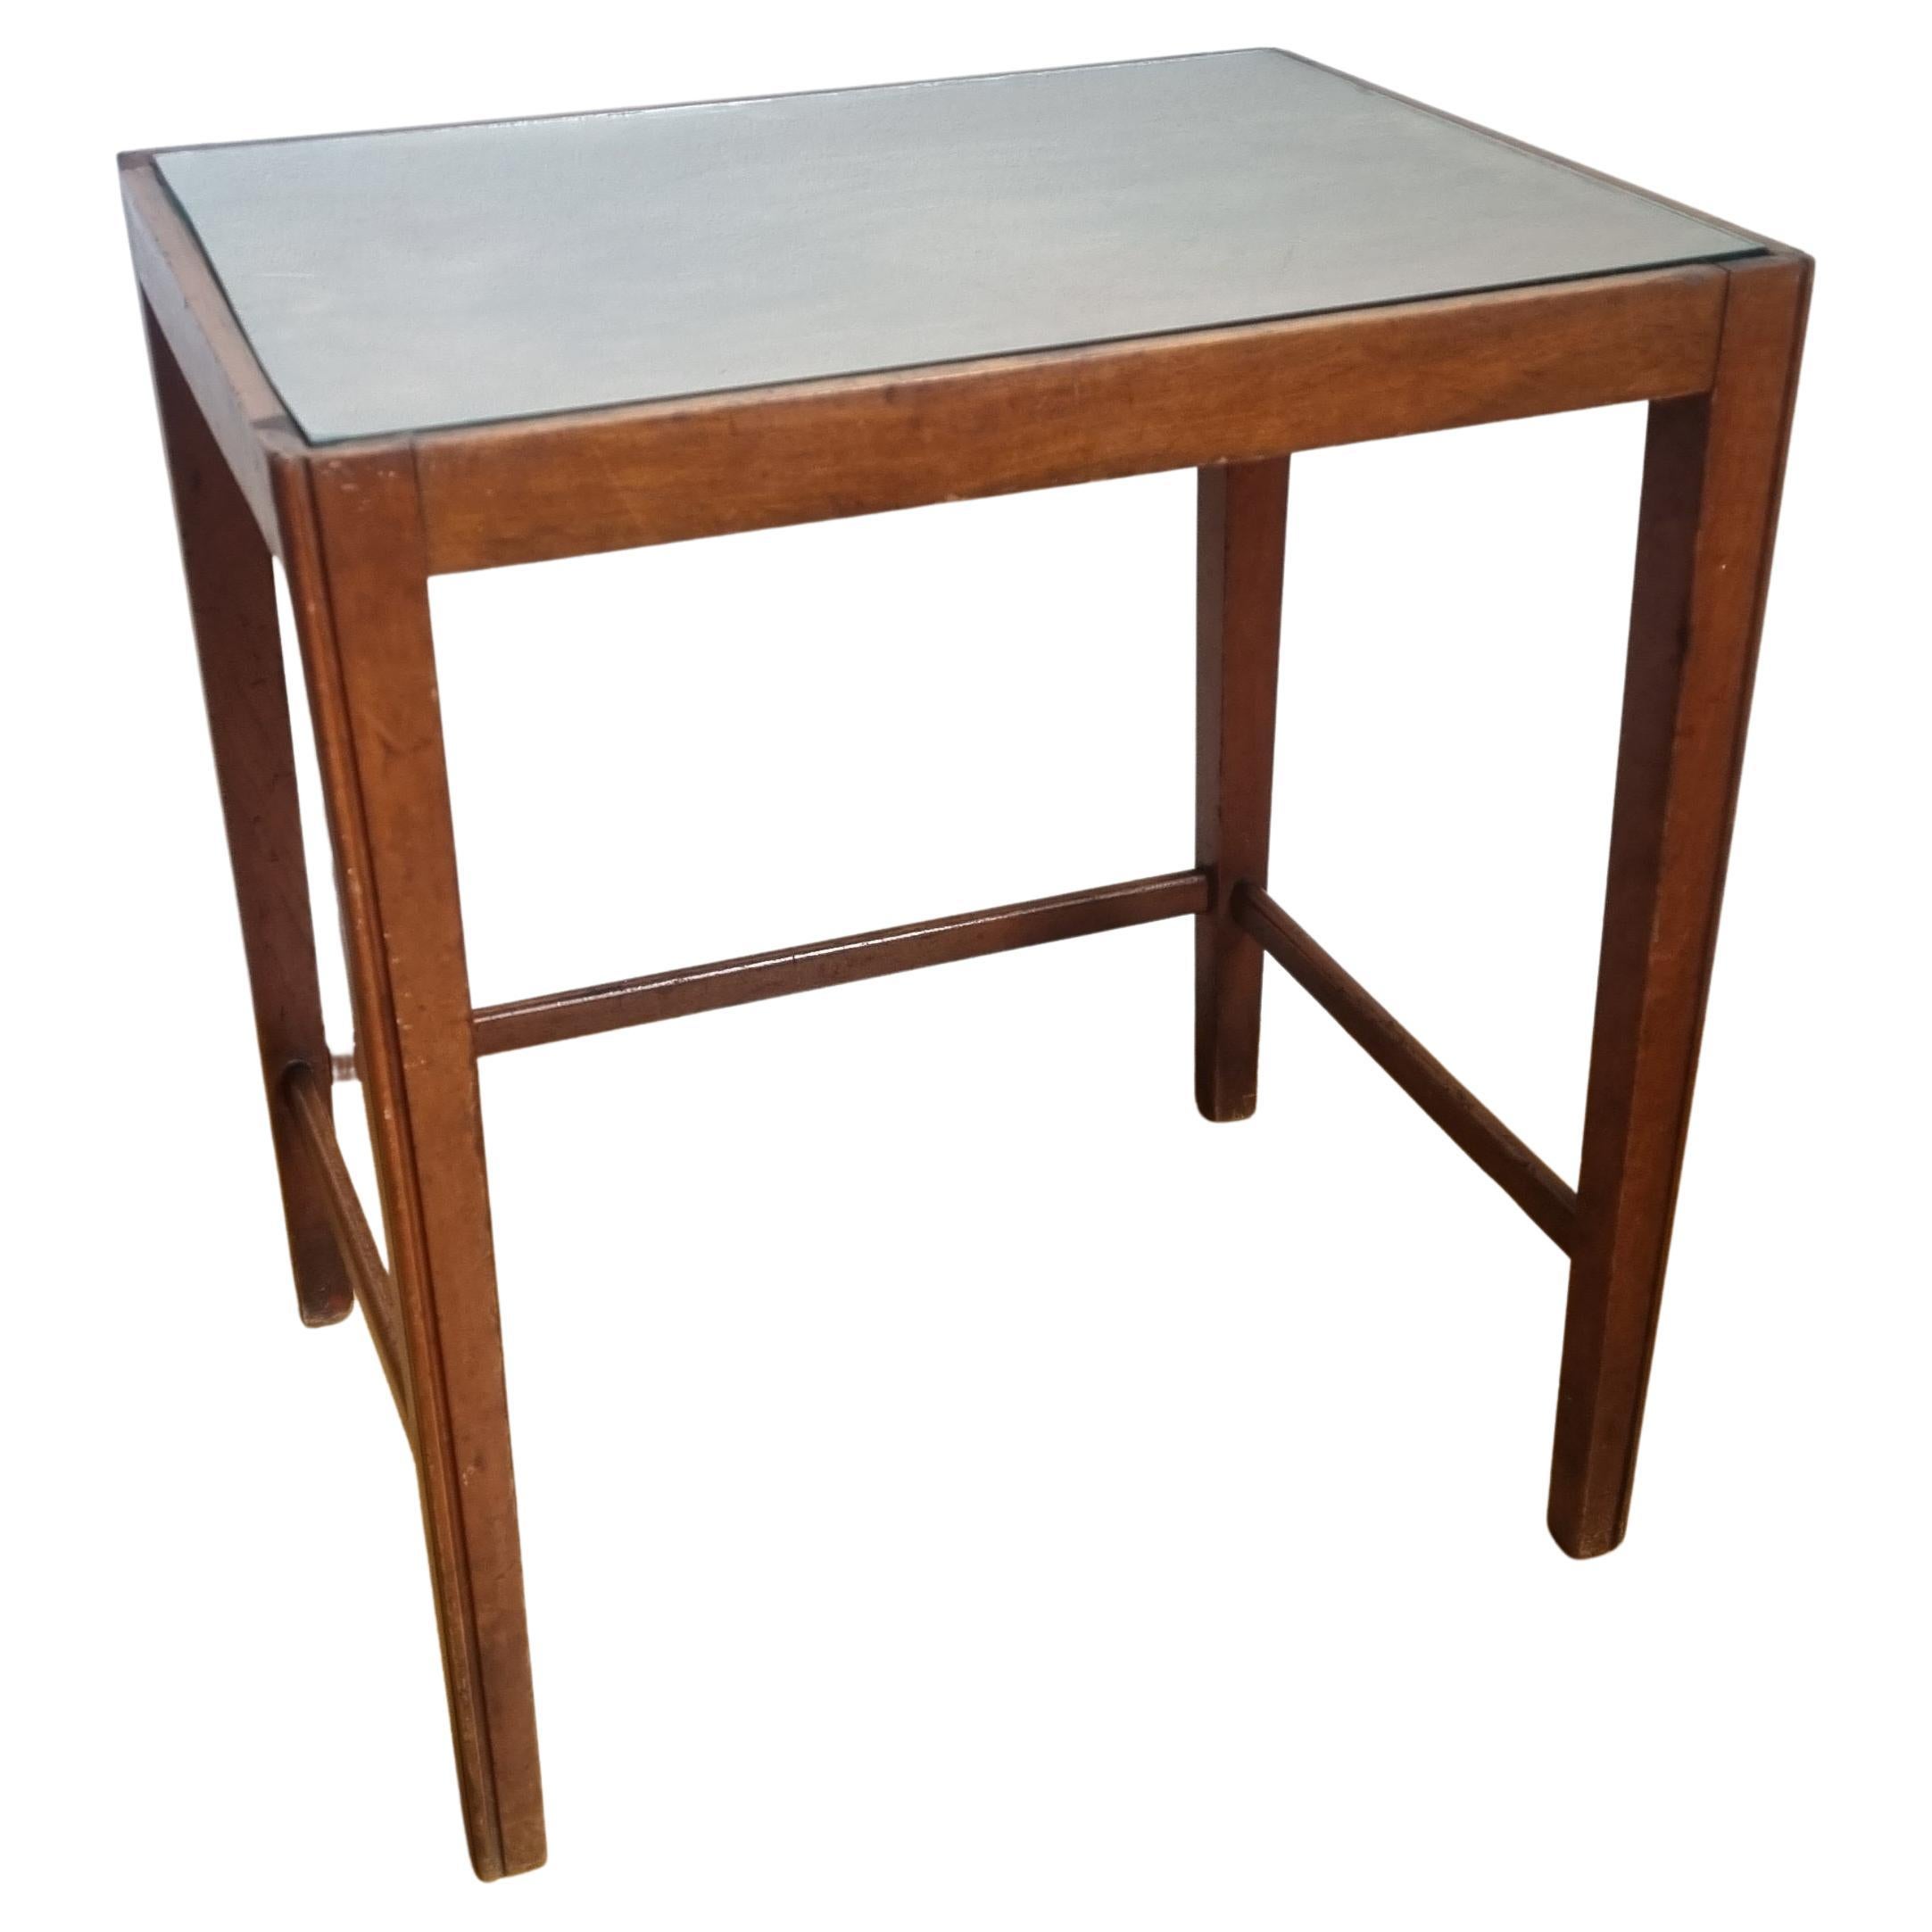 Midcentury Side or Coffee Table Wilhelm Renz, Germany, 1960s For Sale